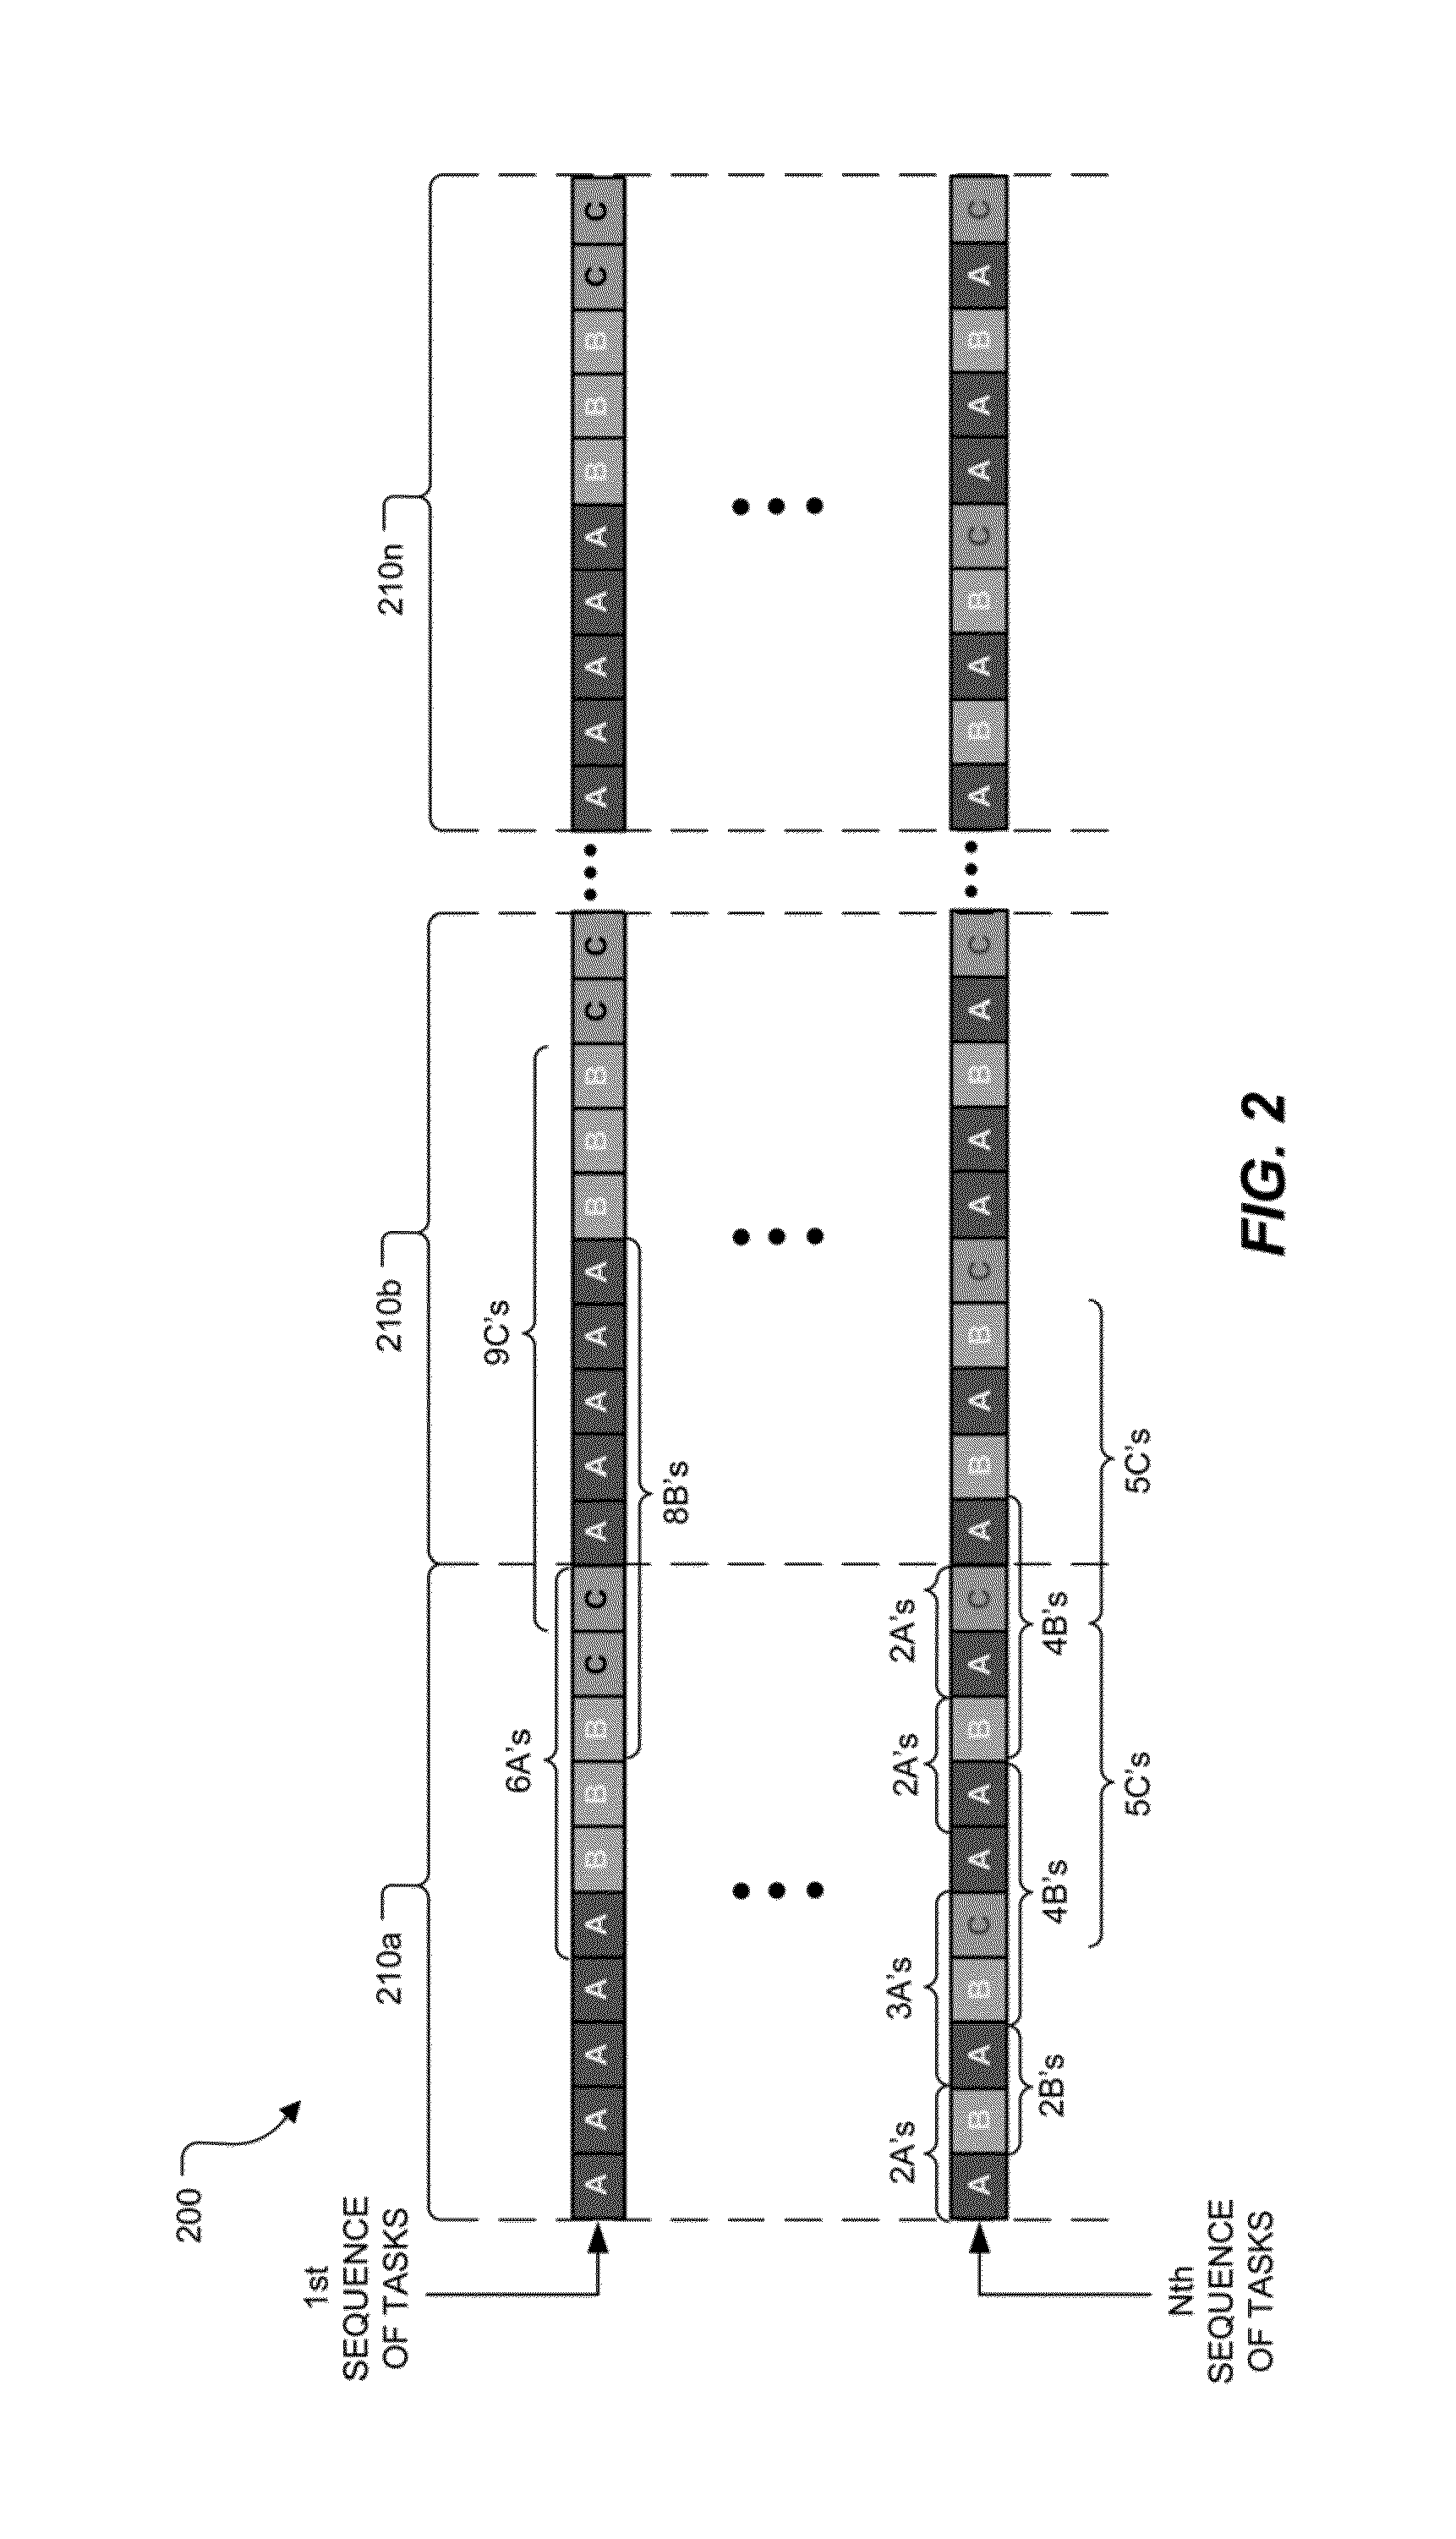 System and method providing levelness of a production schedule